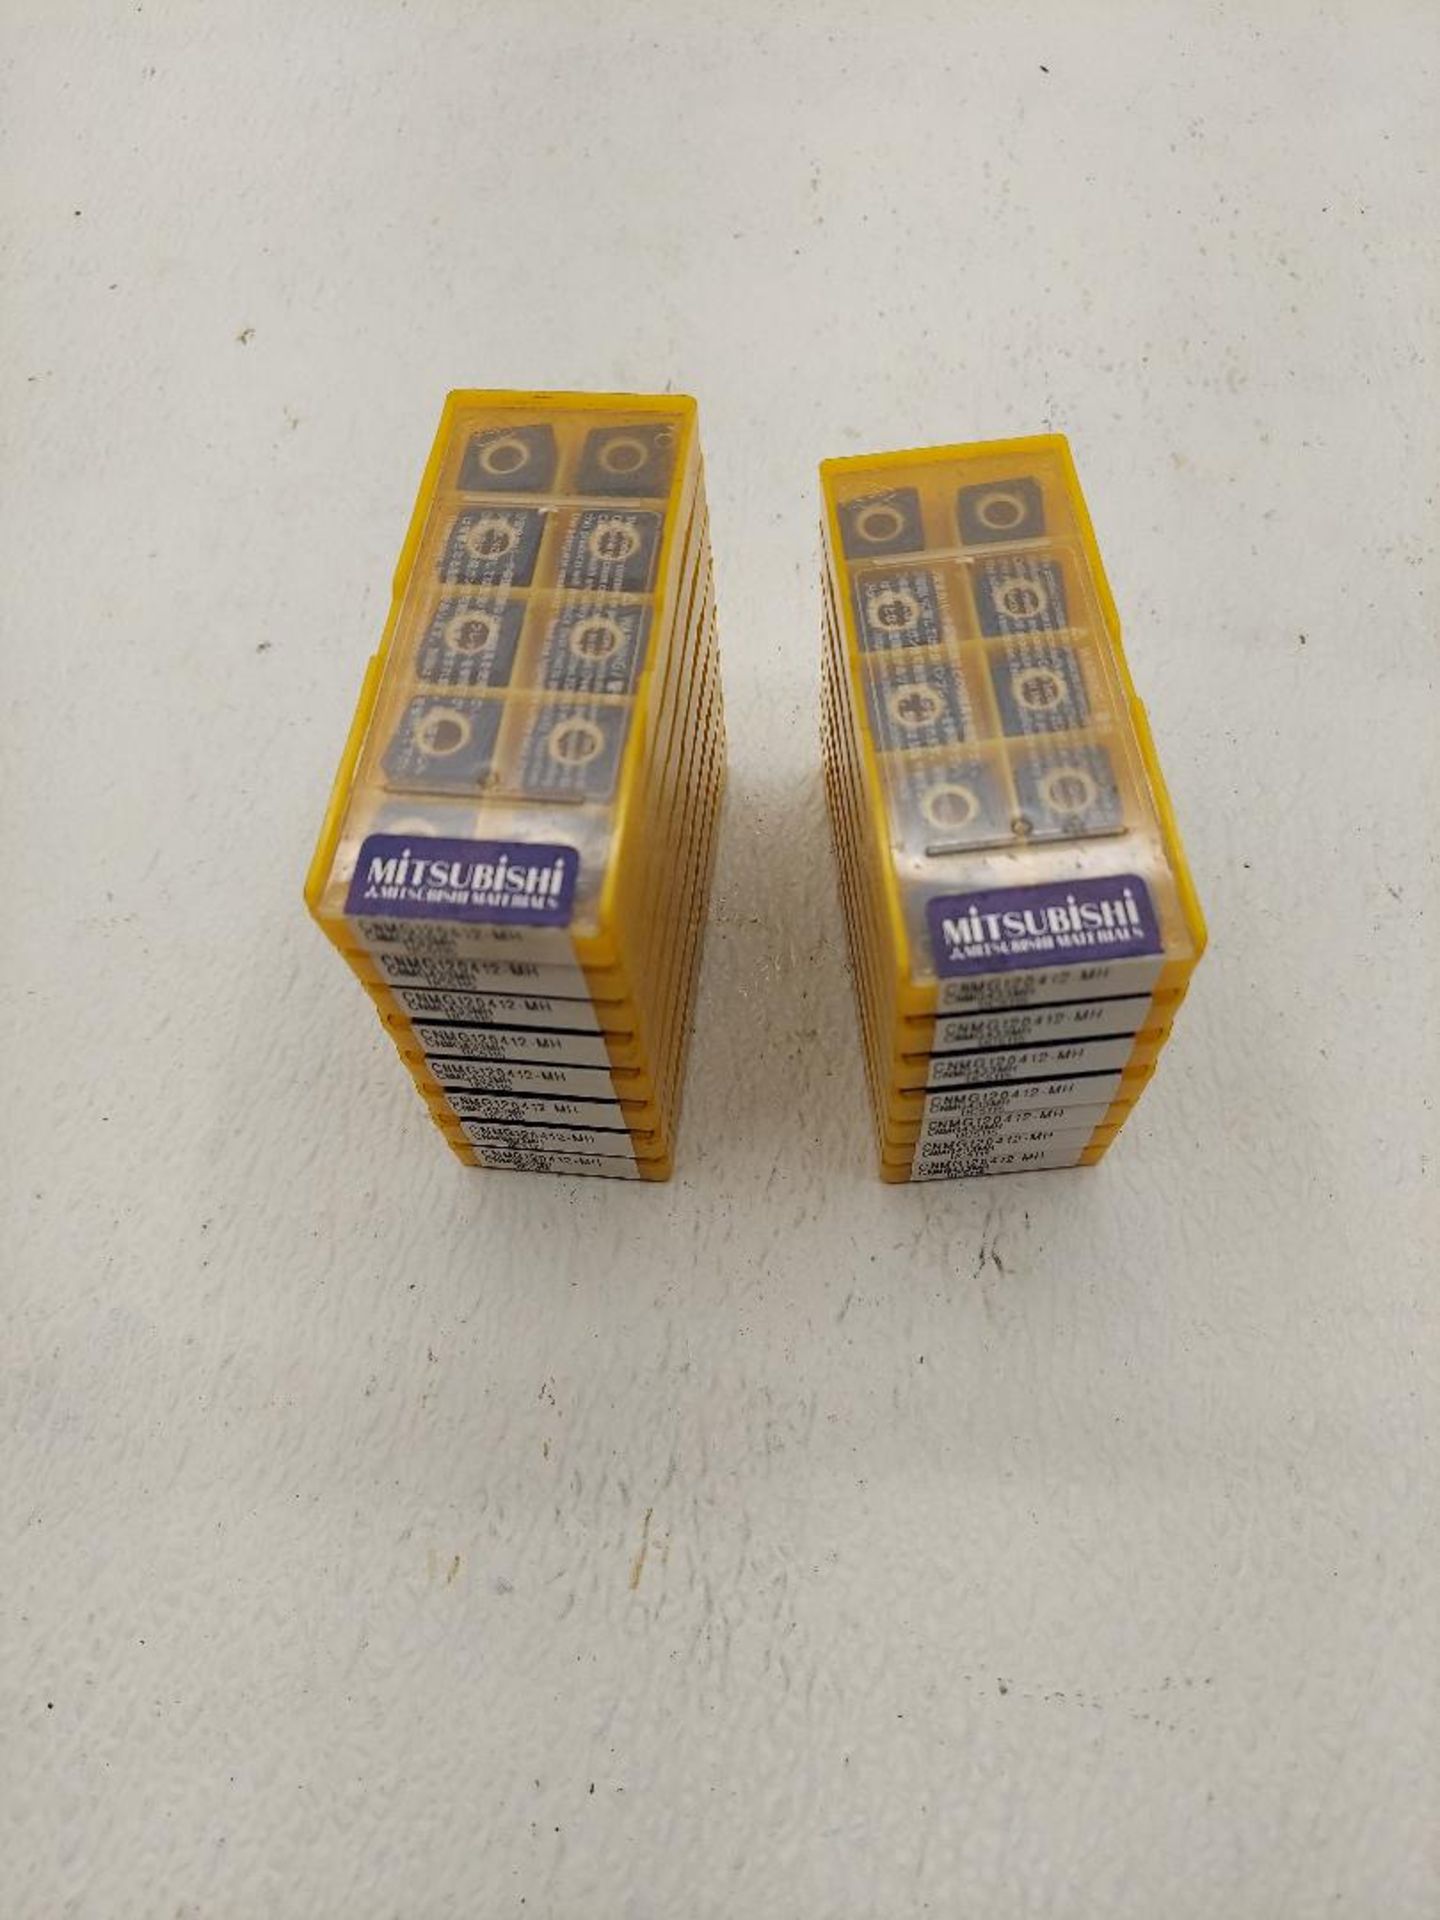 LOT OF (FIFTEEN BOXES, 10 EACH) MITSUBISHI TURNING TOOL INSERTS #CNMG120412-MH (Packing & Crating